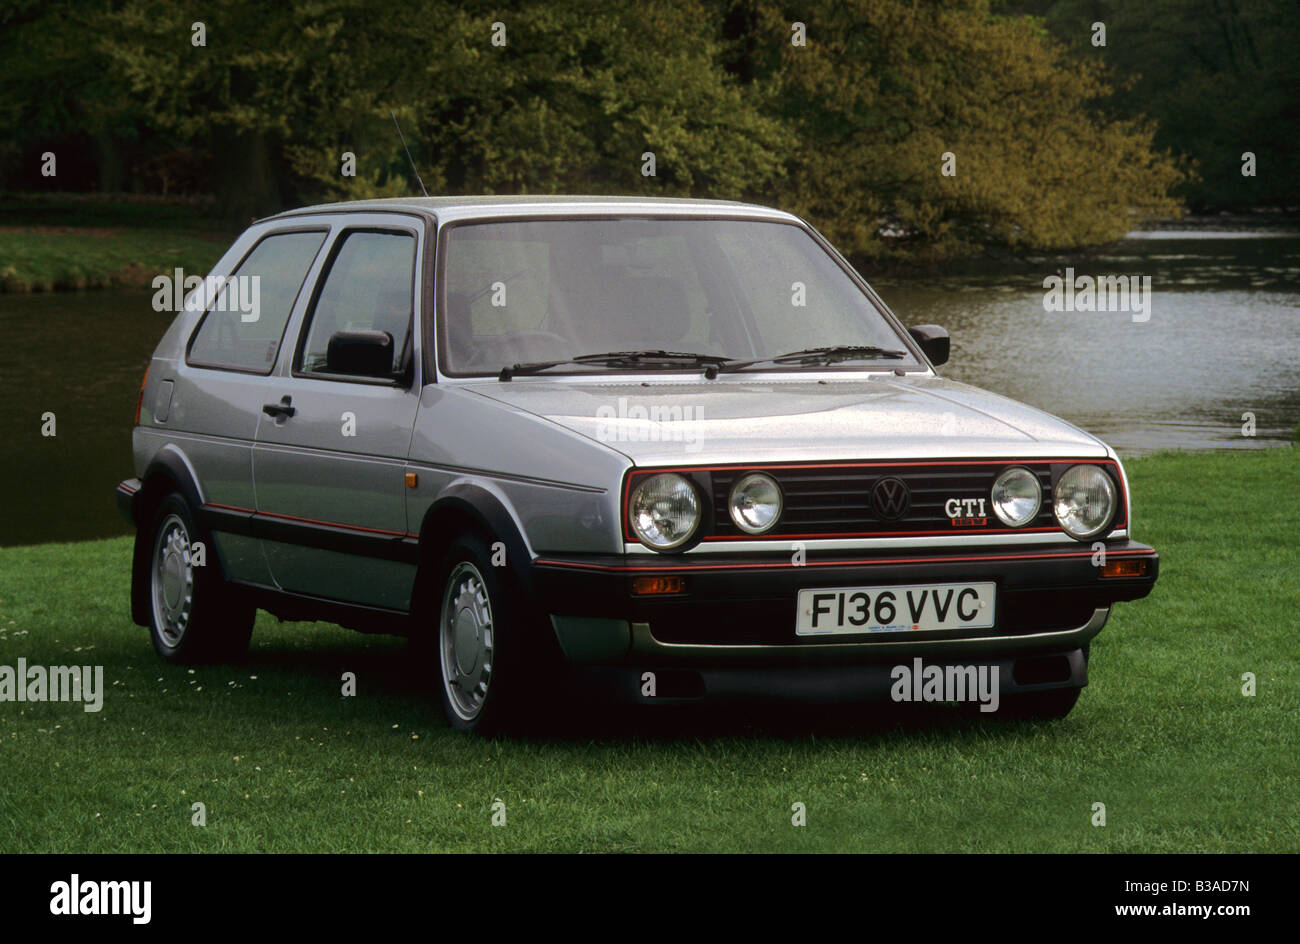 Golf gti mk2 High Resolution Stock Photography and Images - Alamy